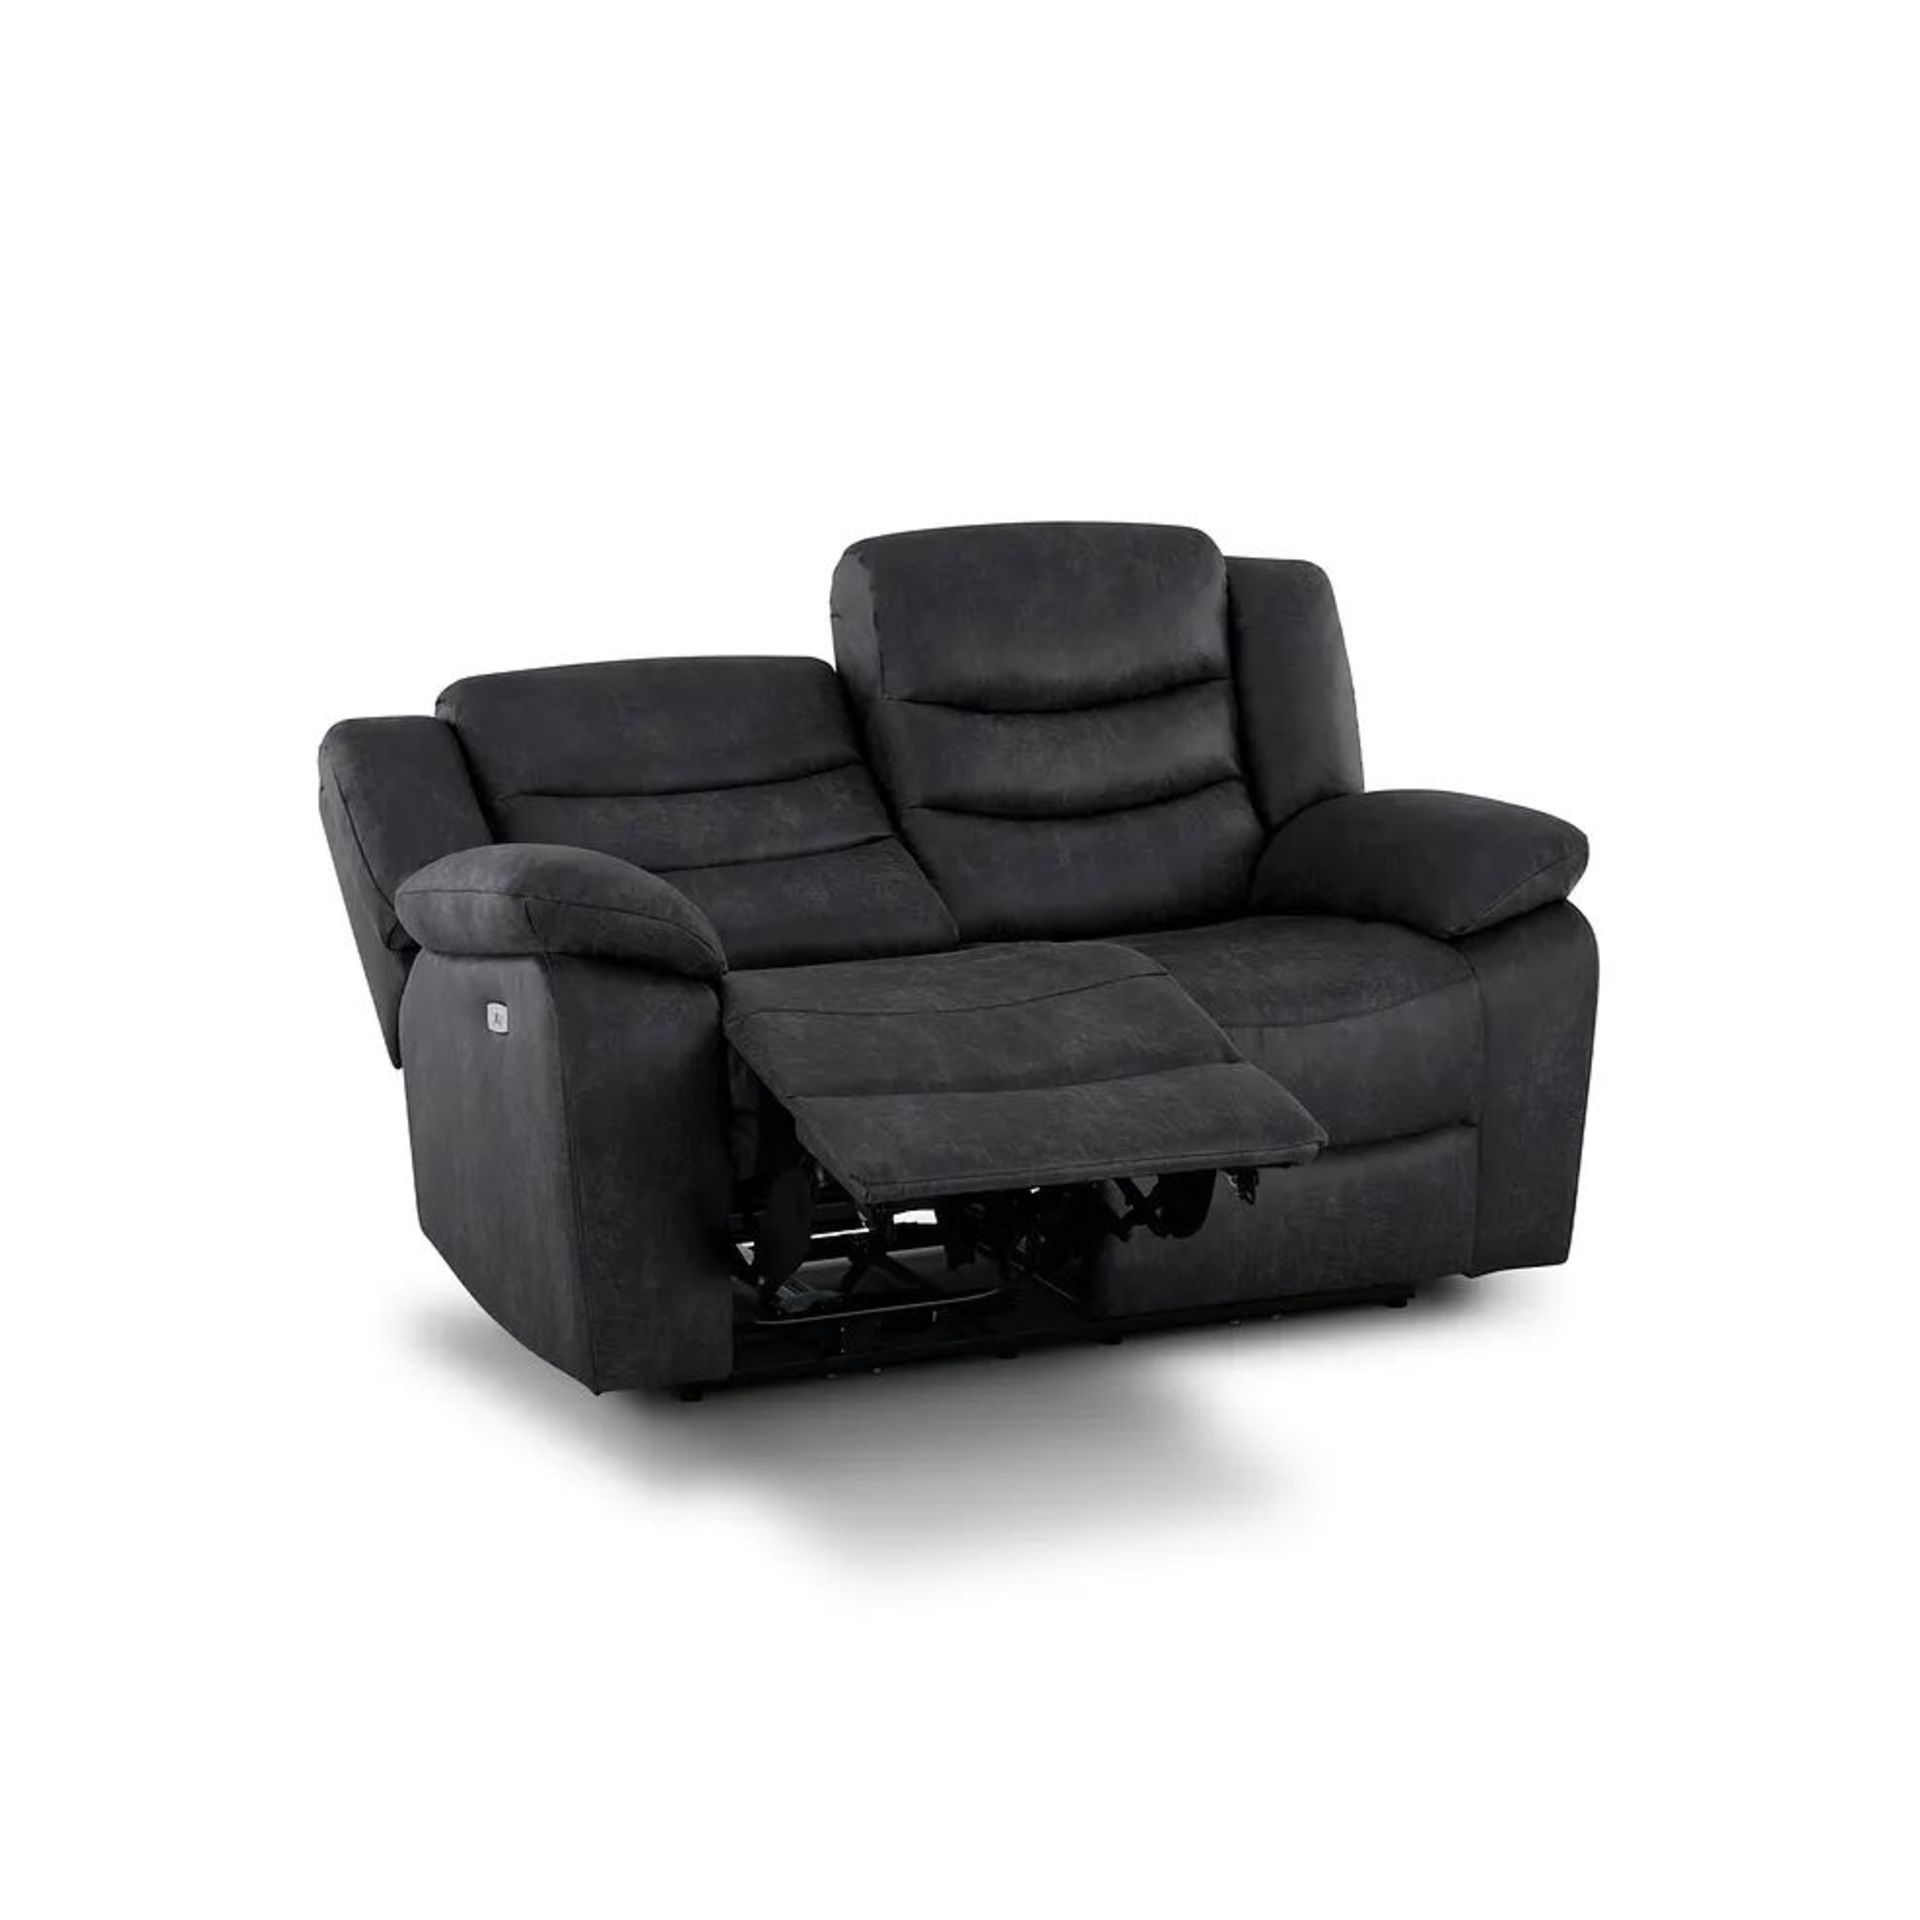 BRAND NEW MARLOW 2 Seater Electric Recliner Sofa - MILLER GREY FABRIC. RRP £1049. Designed to suit - Image 4 of 12